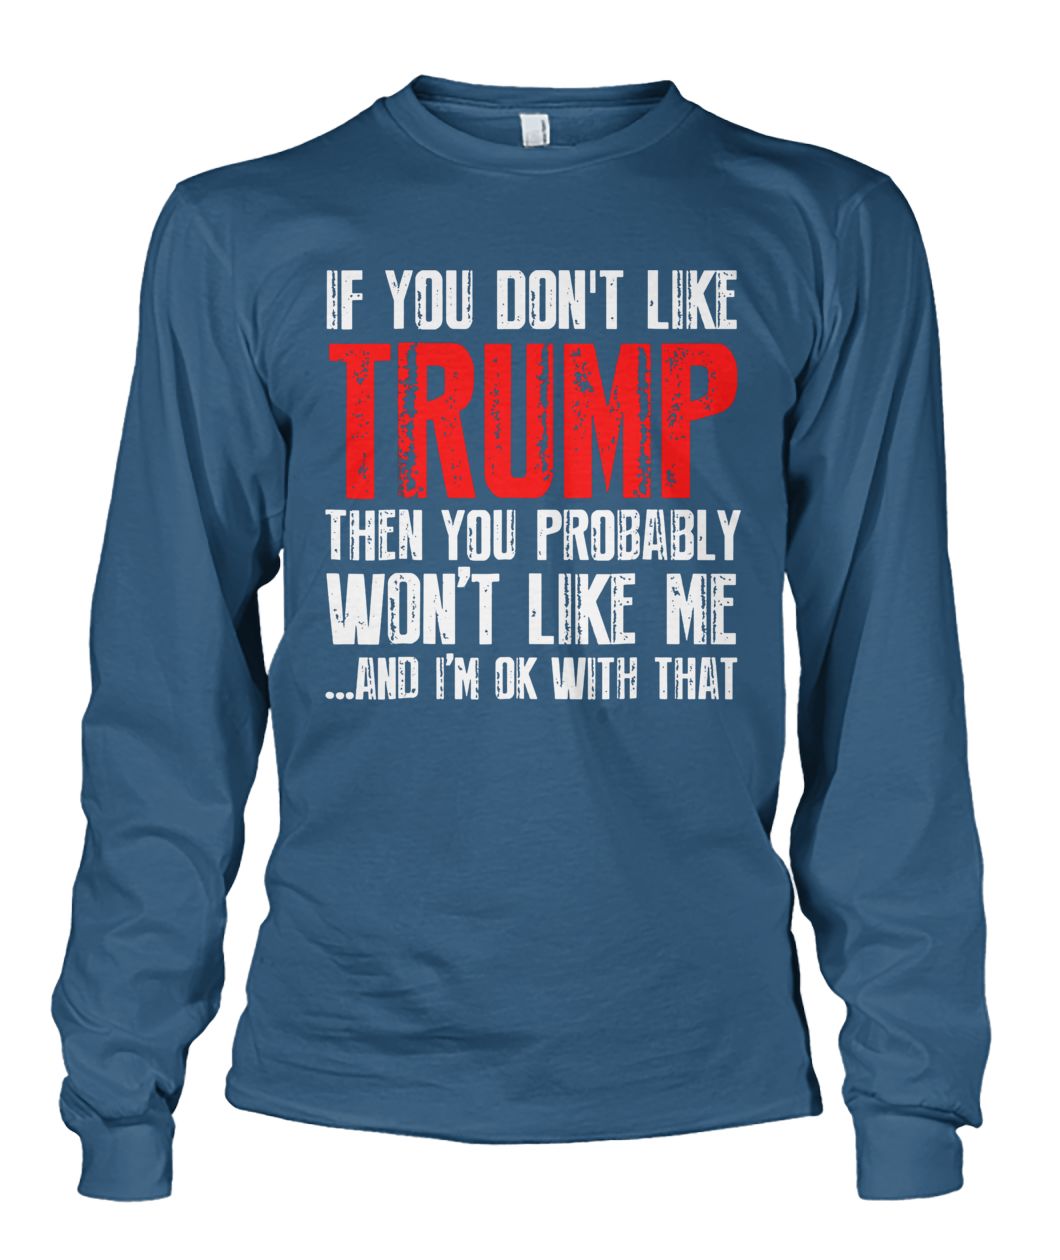 If you don’t like trump then you probably won’t like me and I’m ok with that unisex long sleeve